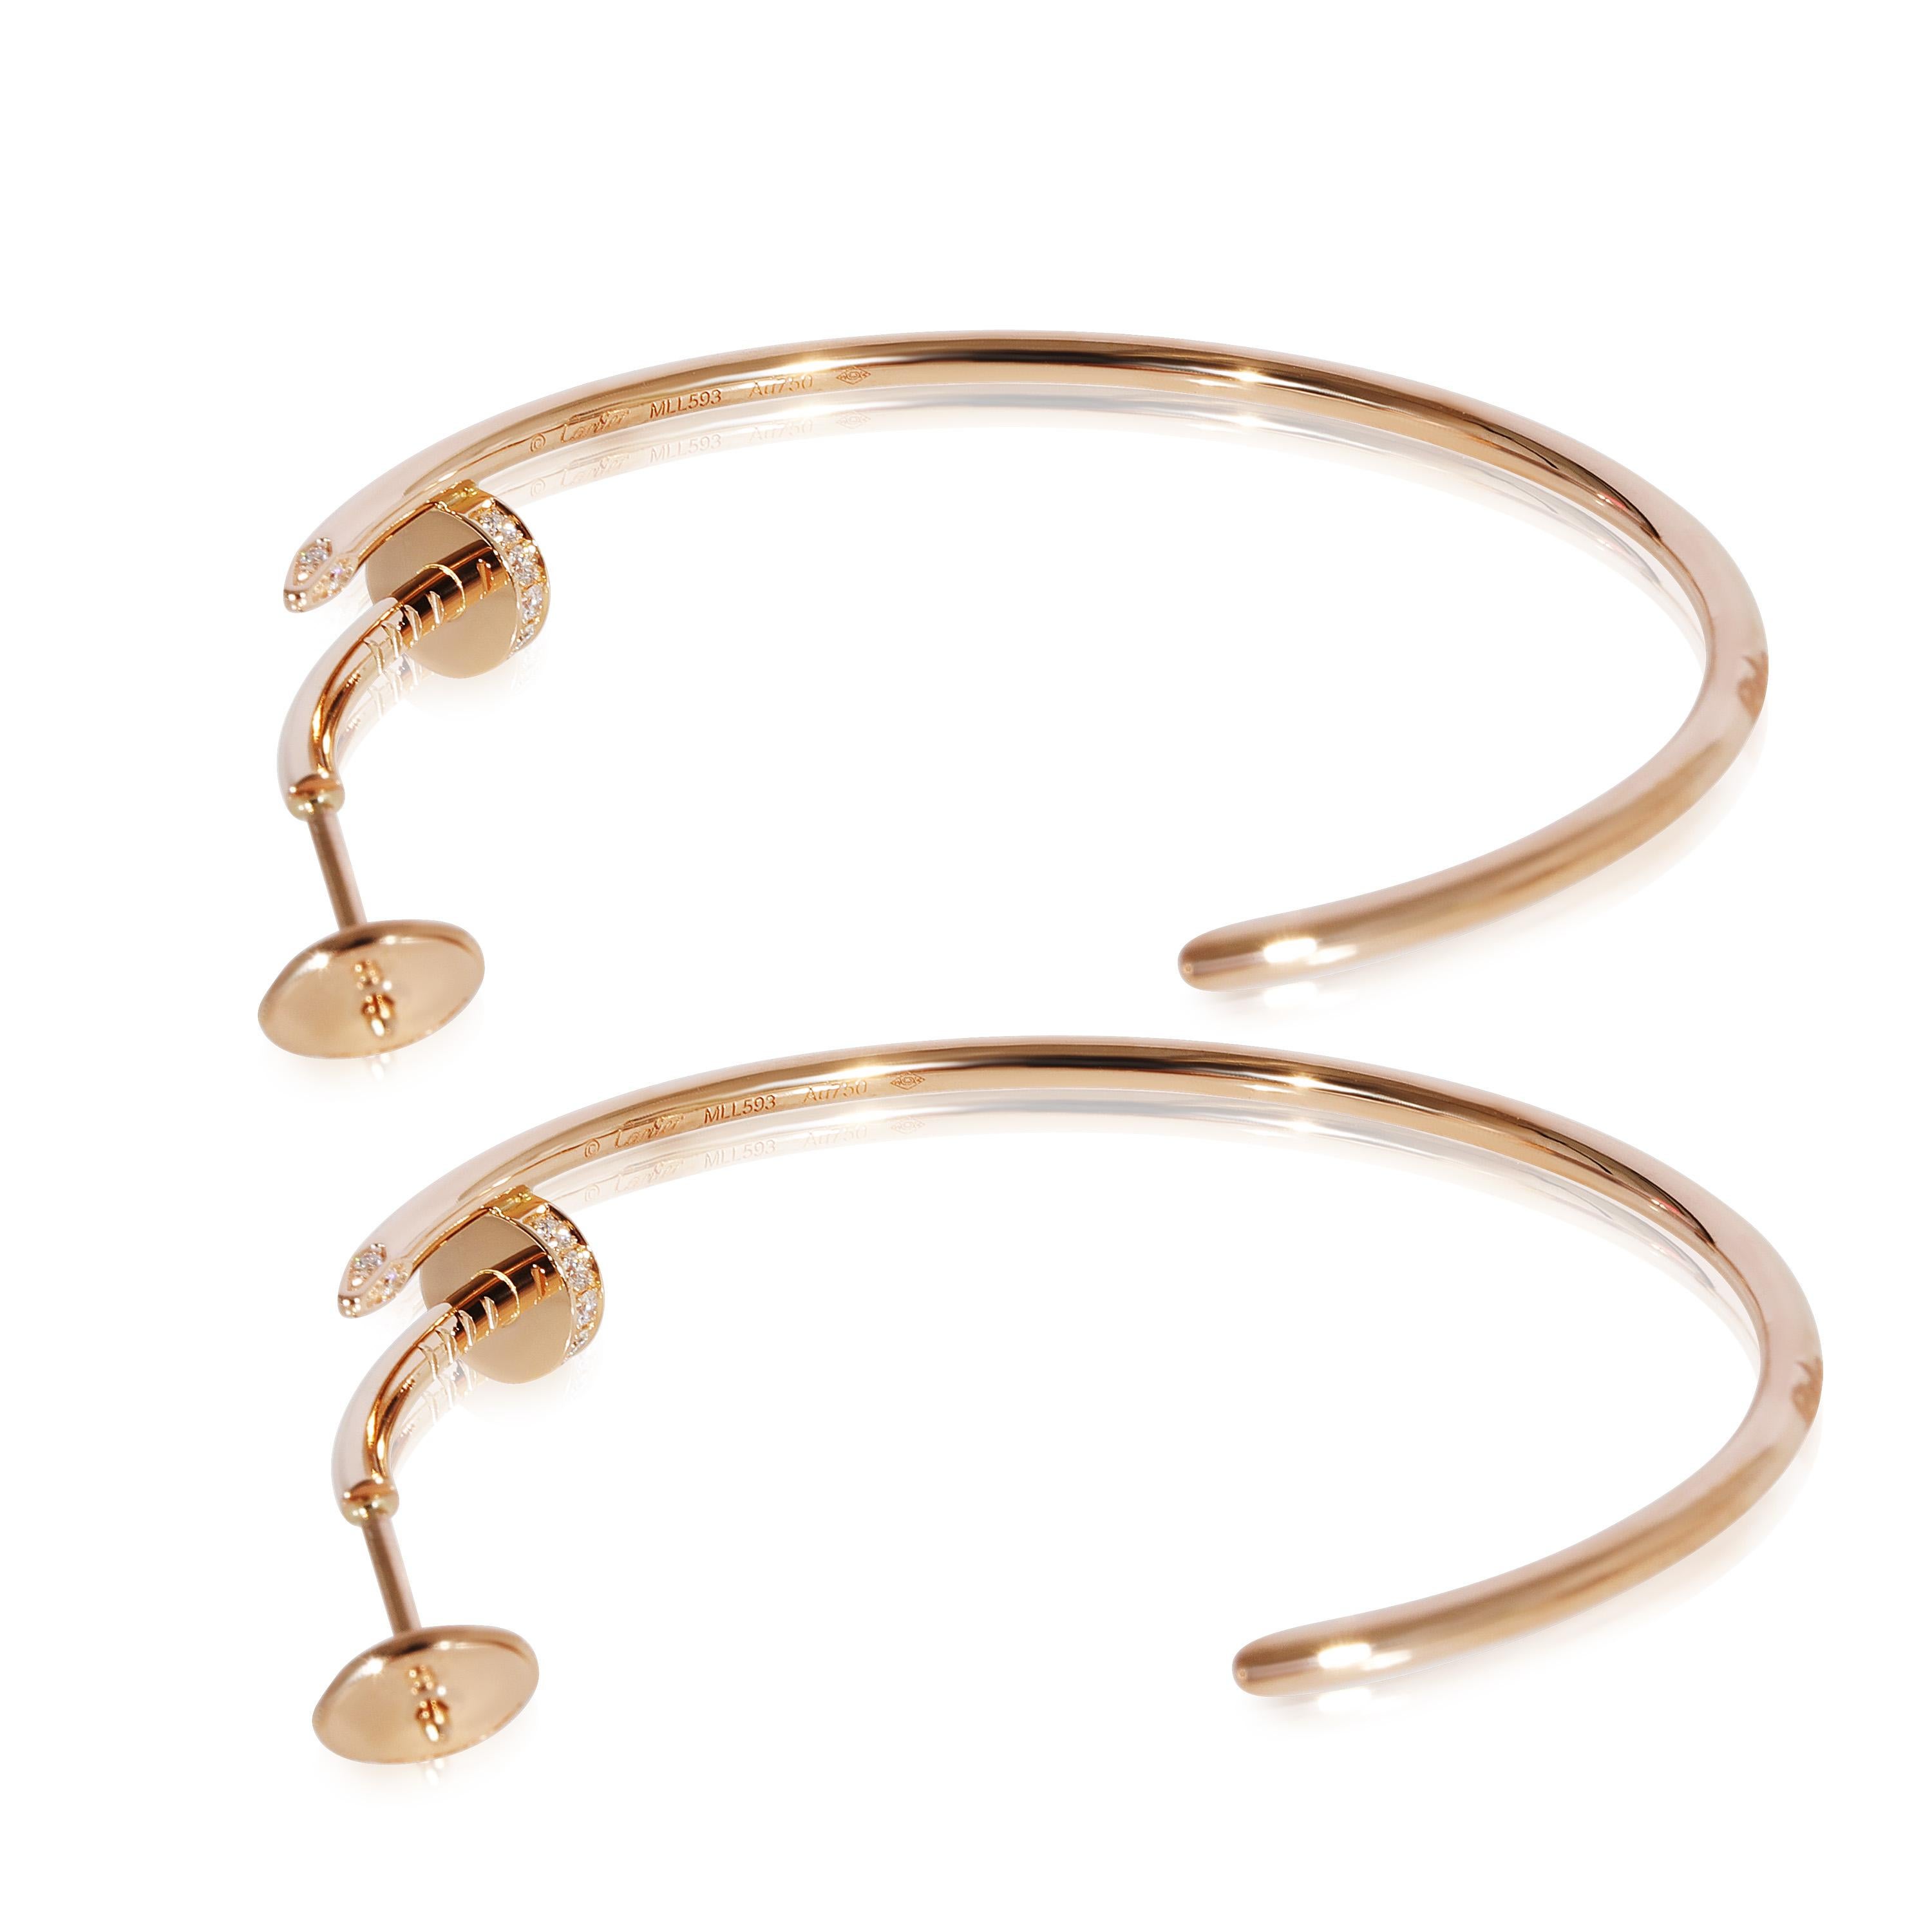 Cartier Juste un Clou Earrings in 18k Rose Gold 0.17 CTW

PRIMARY DETAILS
SKU: 125026
Listing Title: Cartier Juste un Clou Earrings in 18k Rose Gold 0.17 CTW
Condition Description: Retails for 7700 USD. In excellent condition and recently polished. 